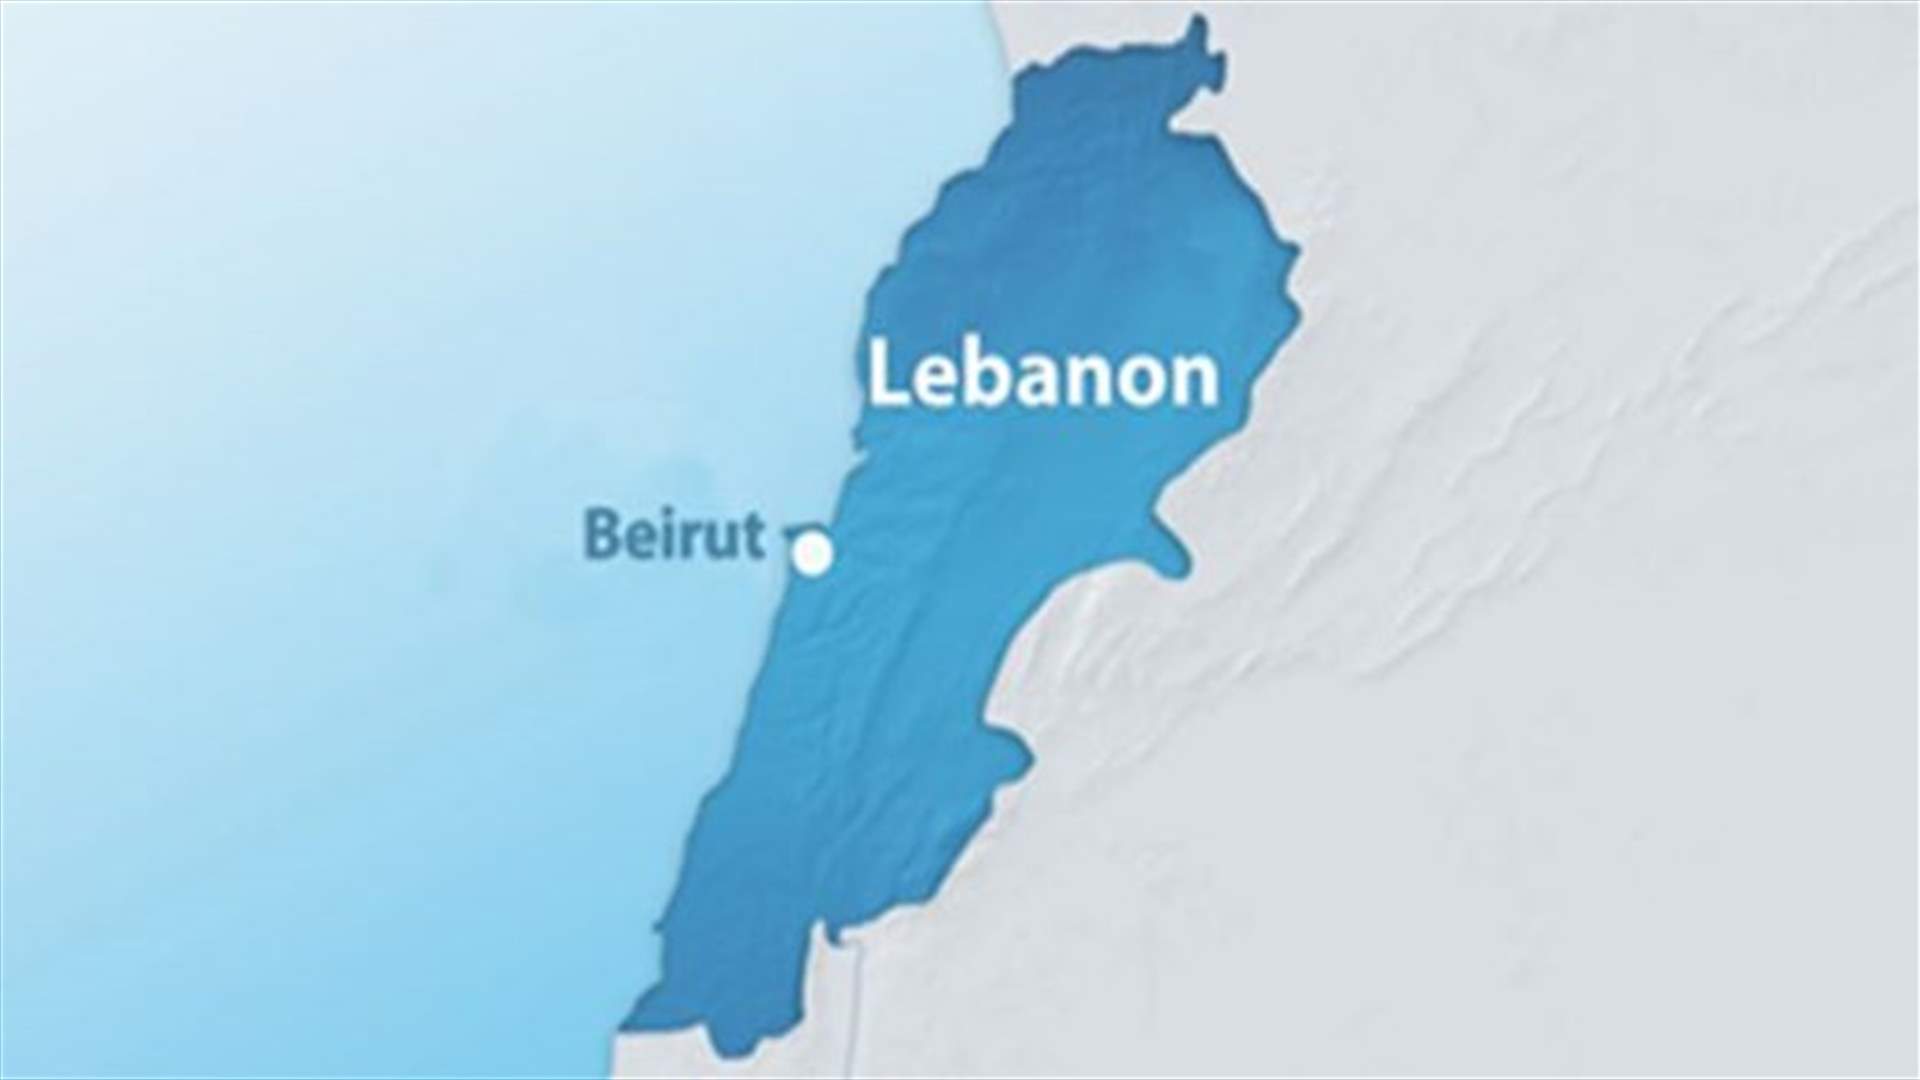 Syrian anti-aircraft fires at Lebanese military helicopter